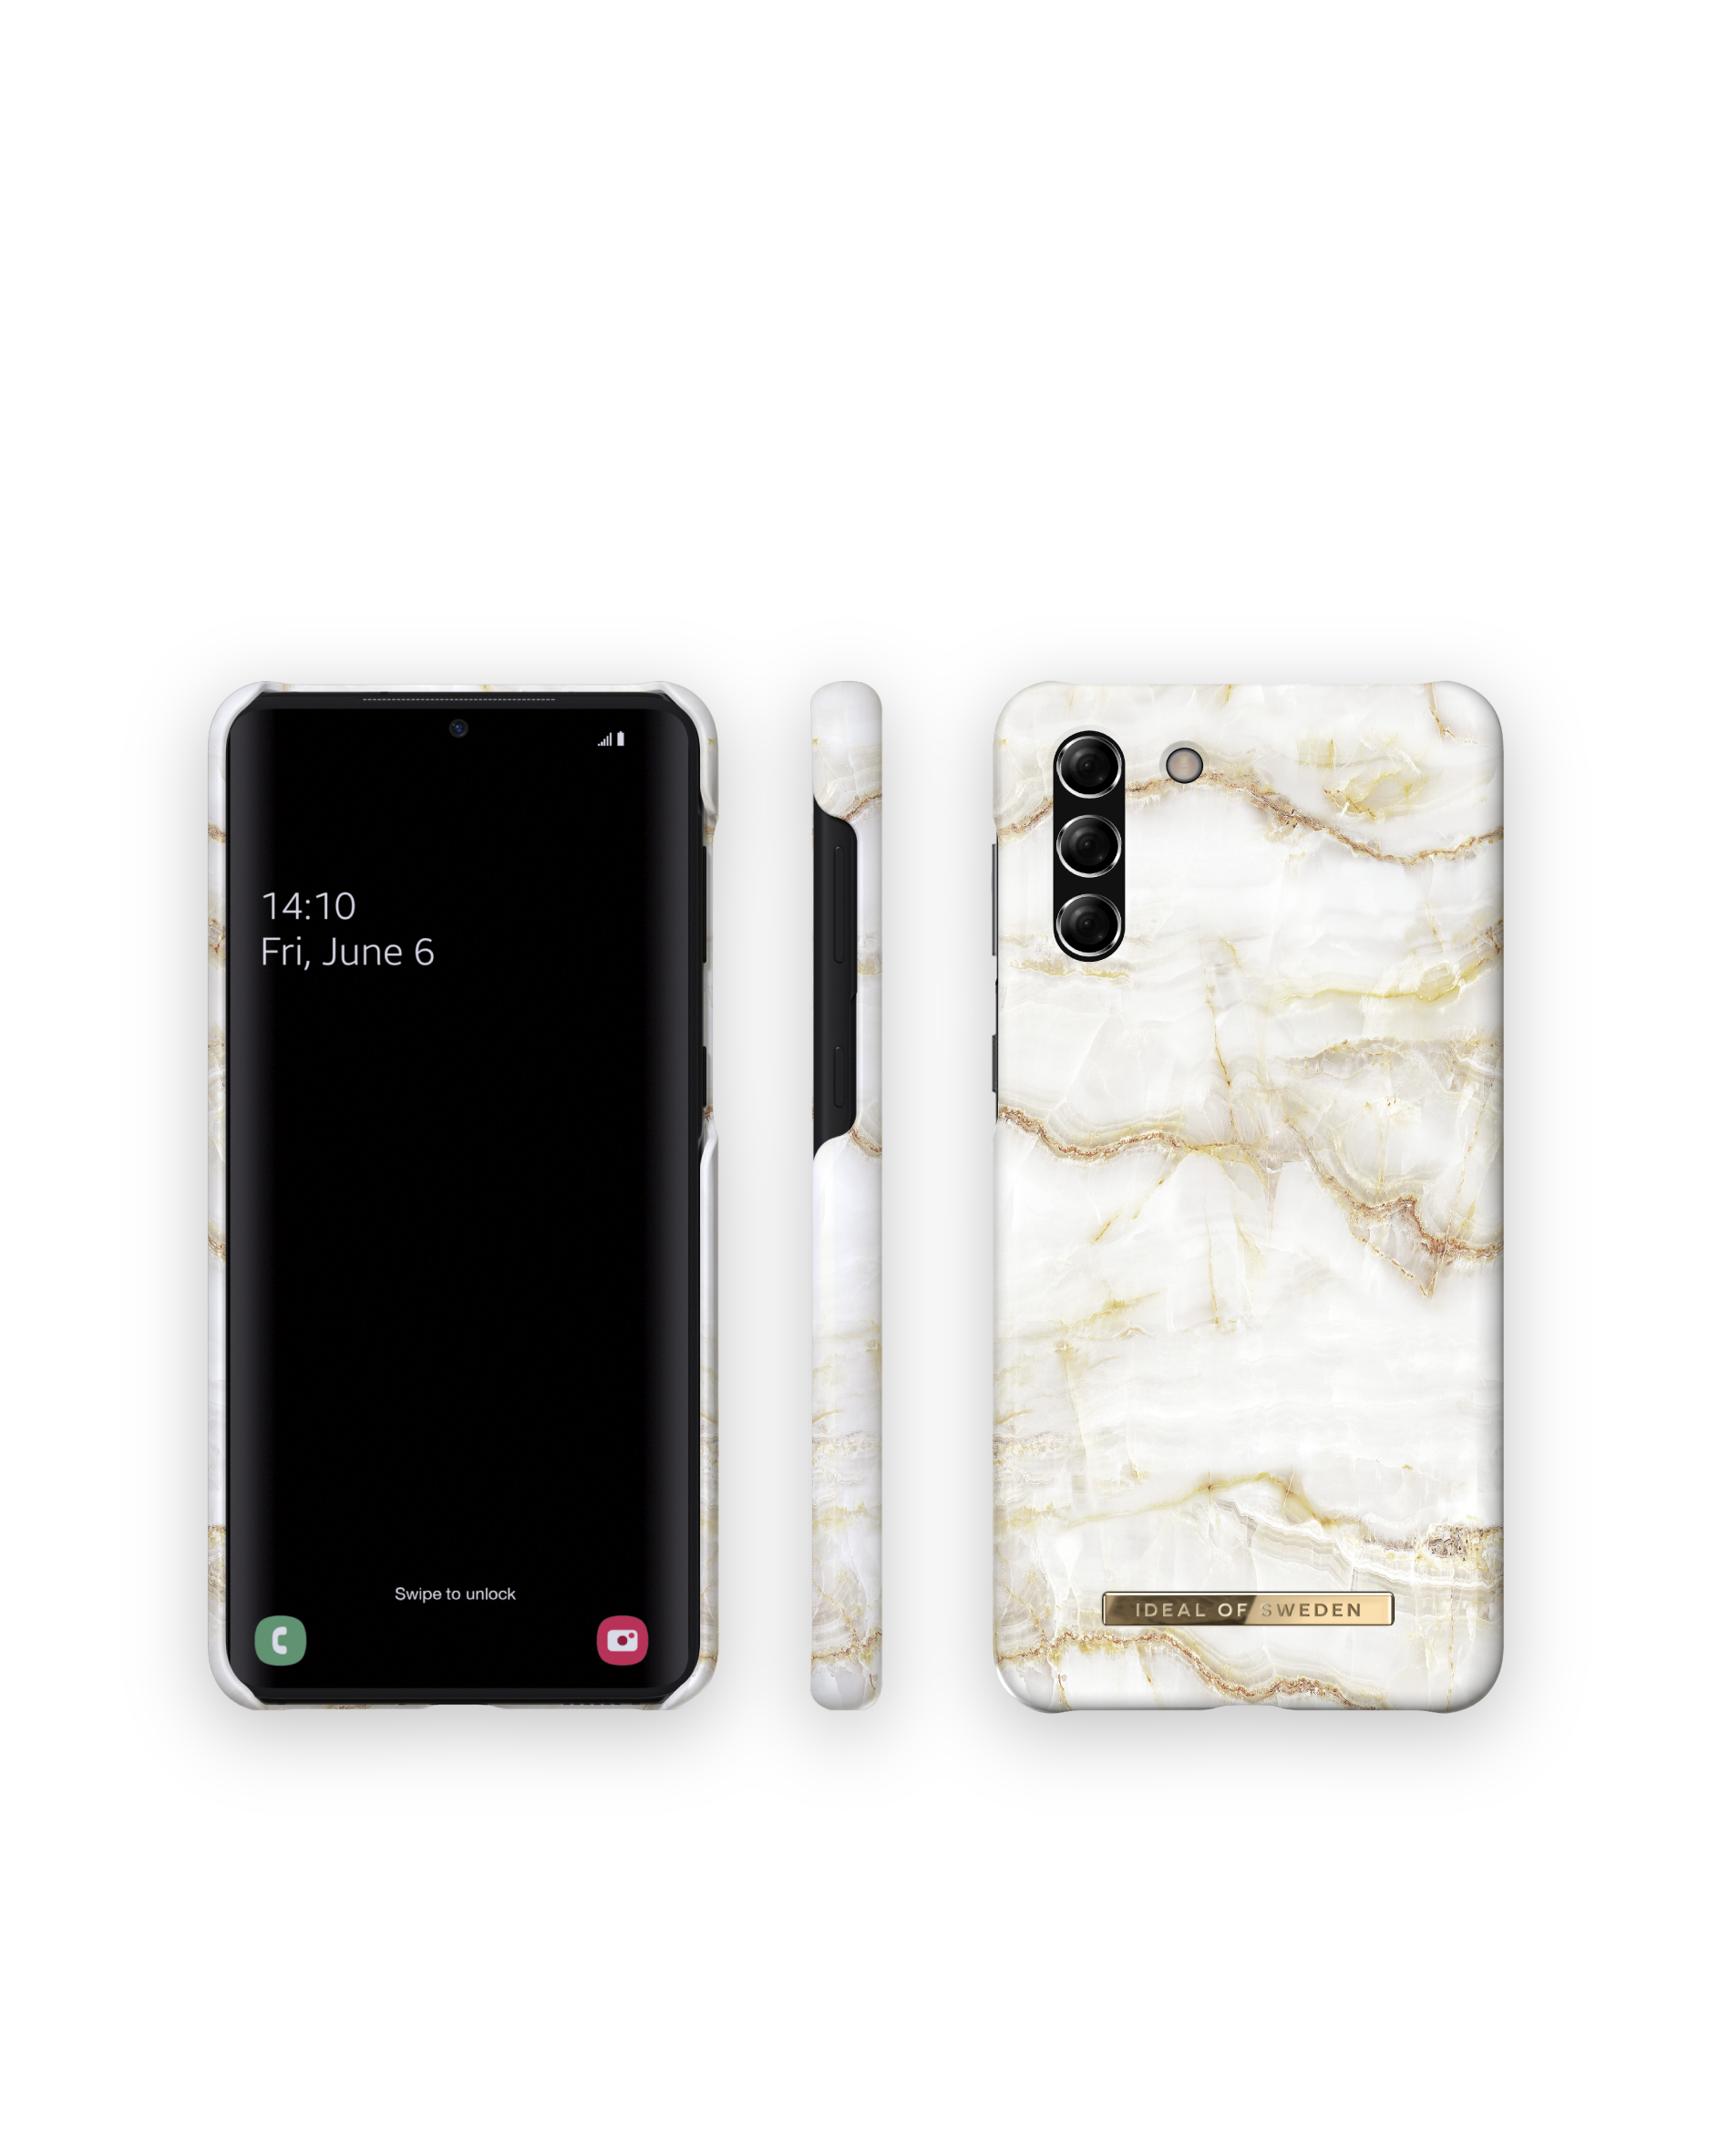 Backcover, Marble Galaxy Golden SWEDEN IDEAL S21+, Pearl Samsung, IDFCSS20-S21P-194, OF